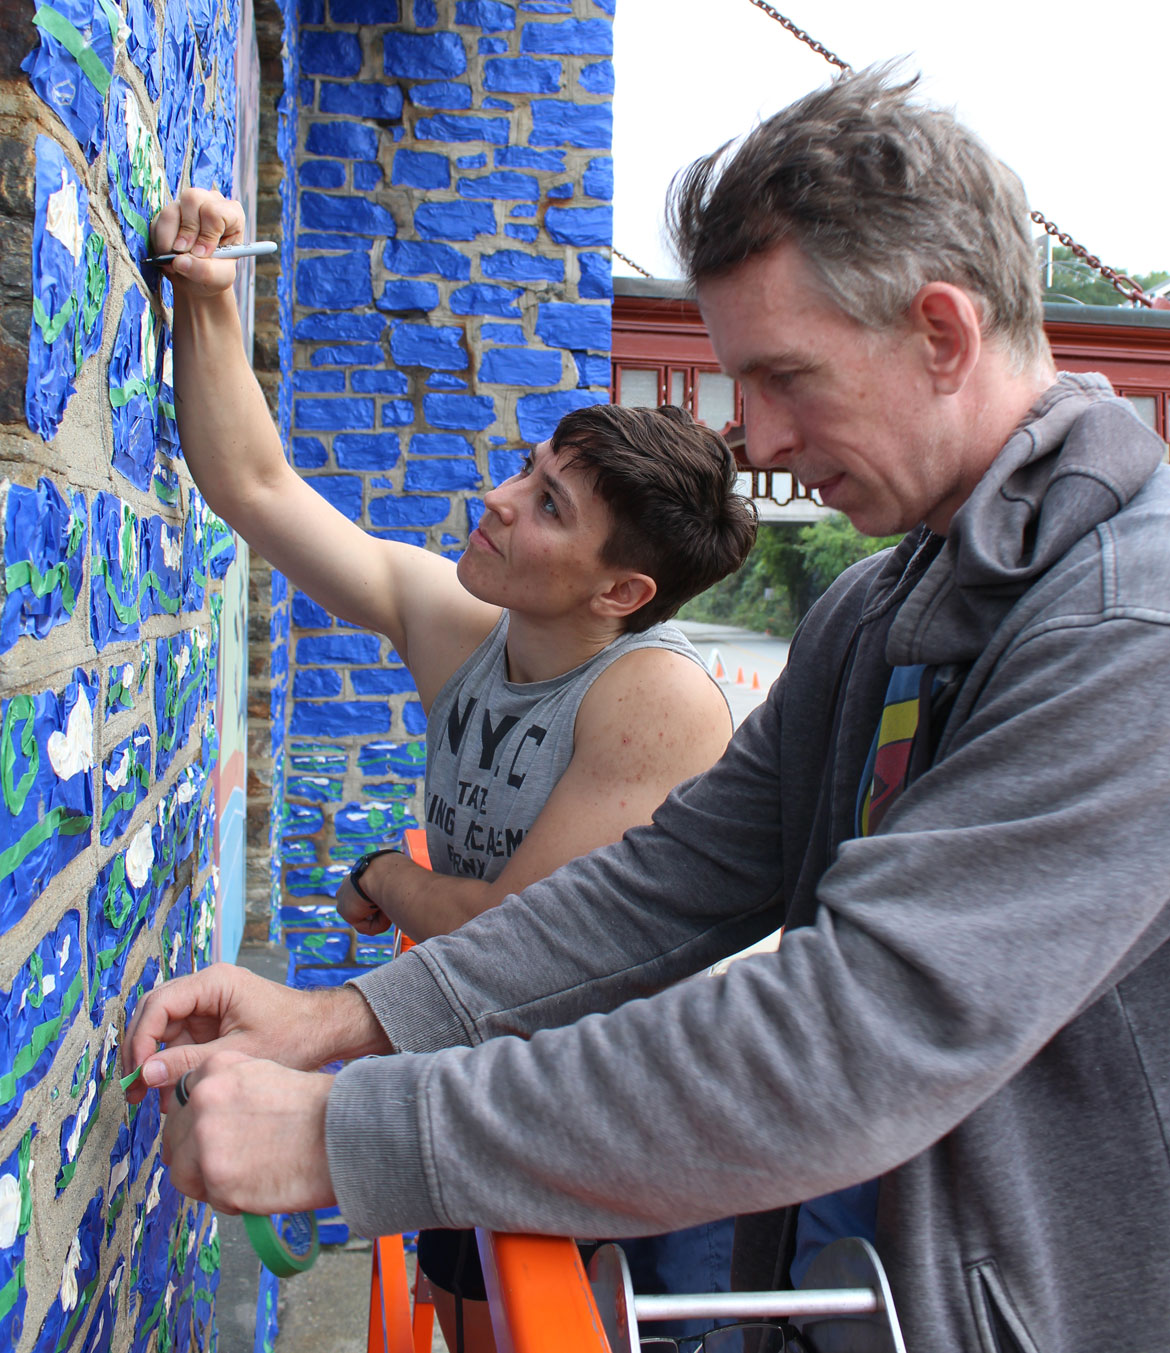 Leah Smith (left) and Michael Townsend of Tape Art work on their temporary mural on the facade of the Brattleboro Museum & Art Center in Vermont. (Photo courtesy Brattleboro Museum & Art Center)